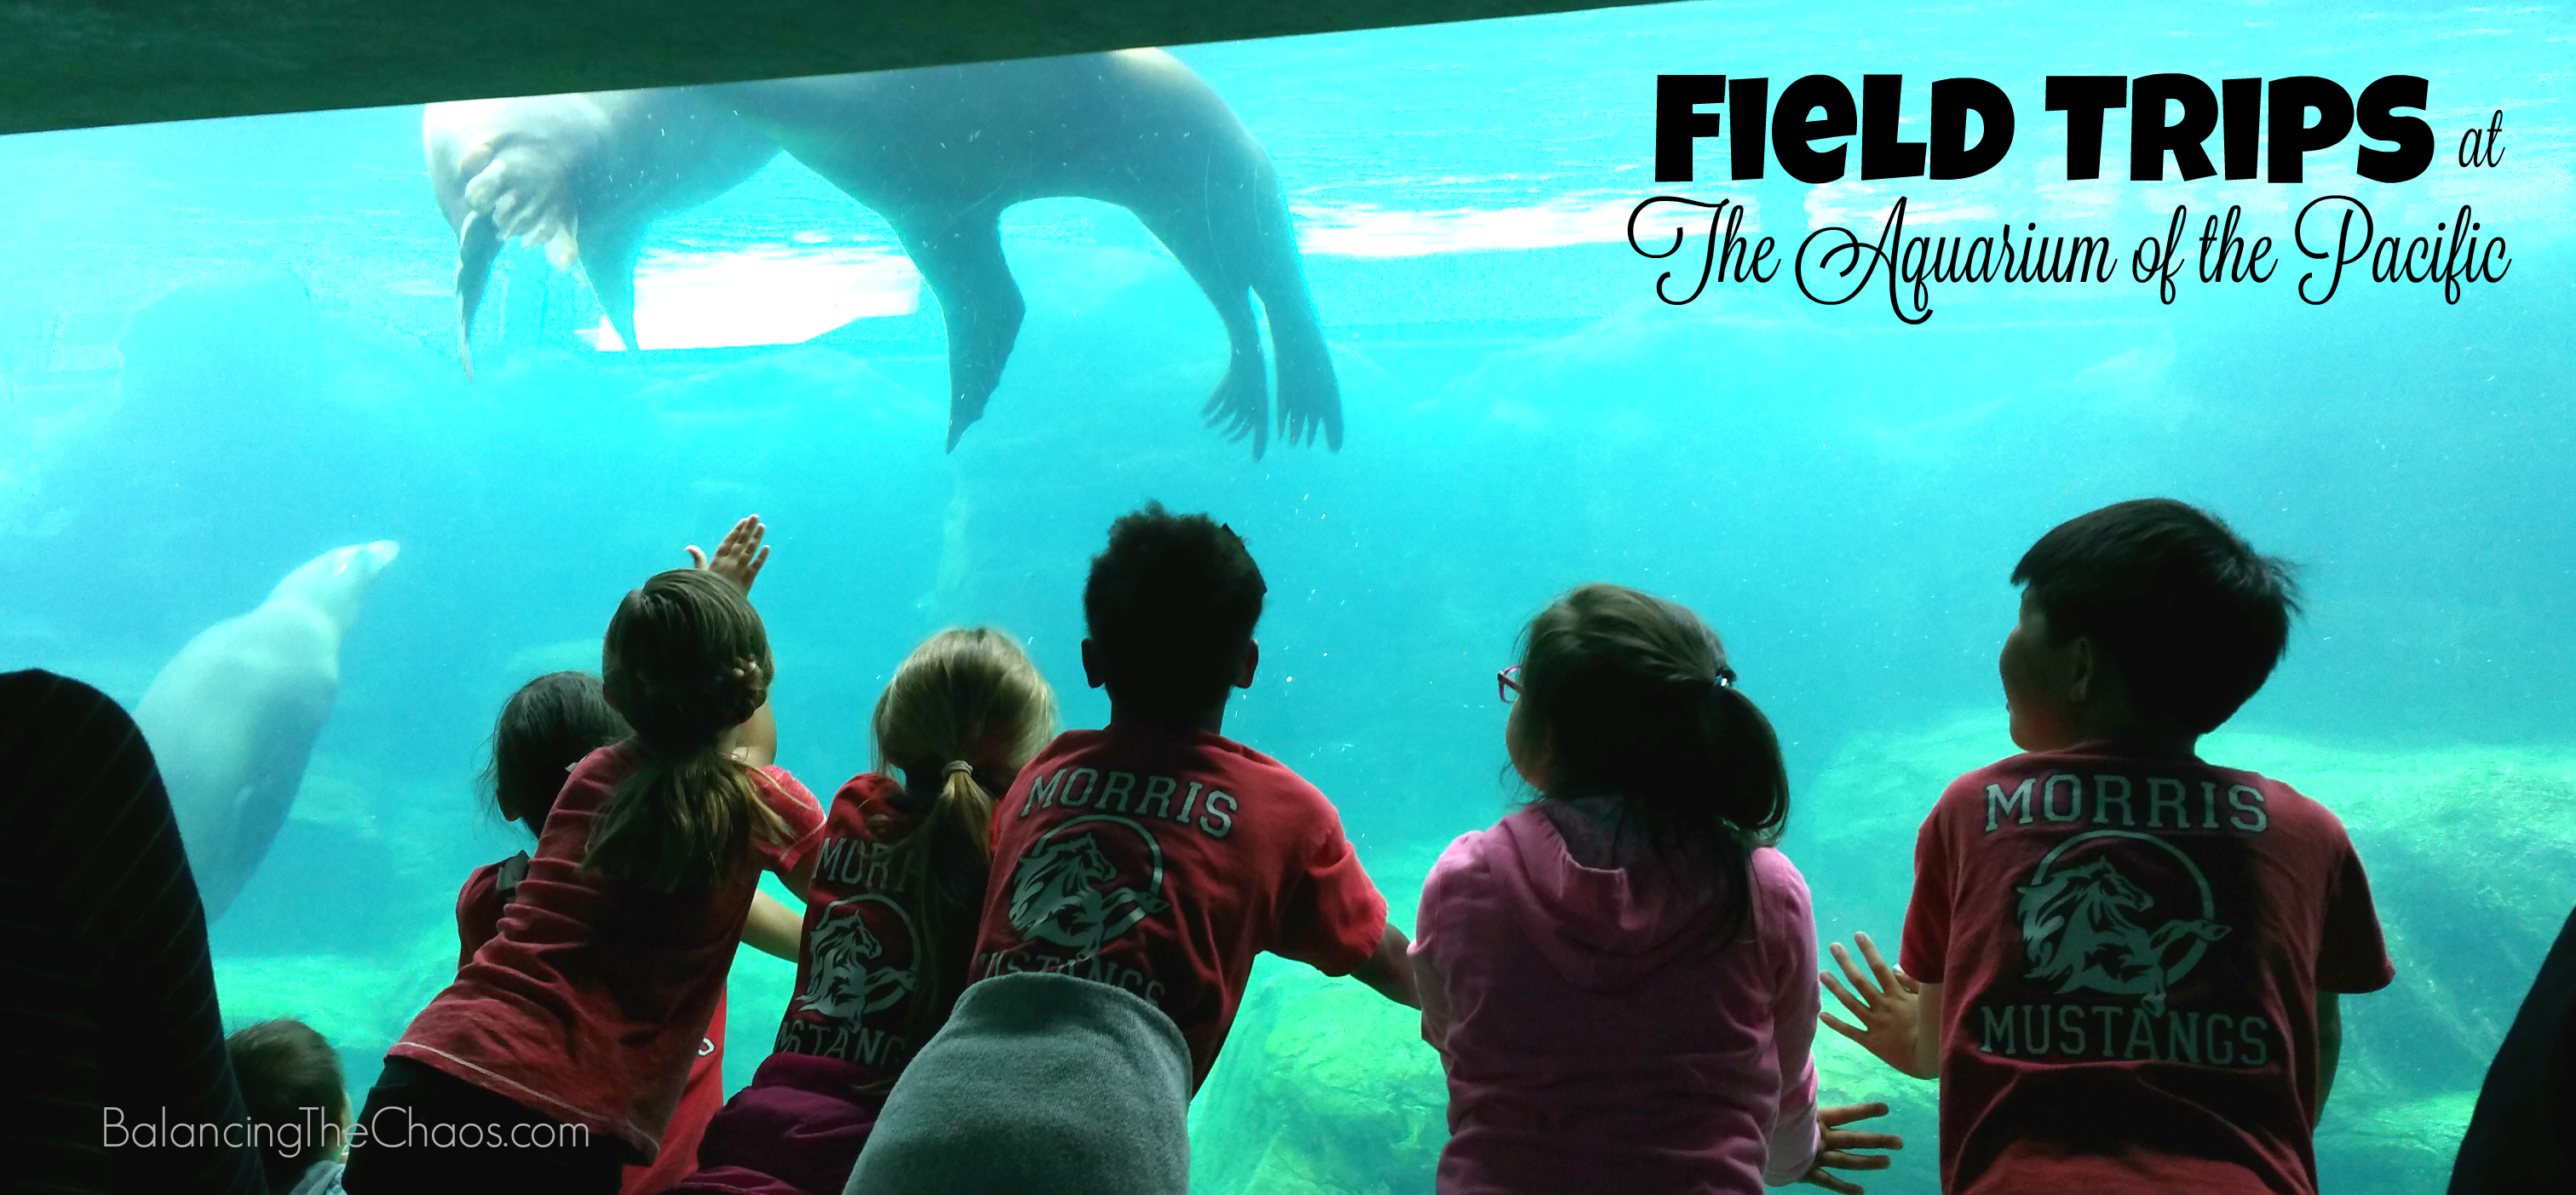 Field Trips at the Aquarium of the Pacific